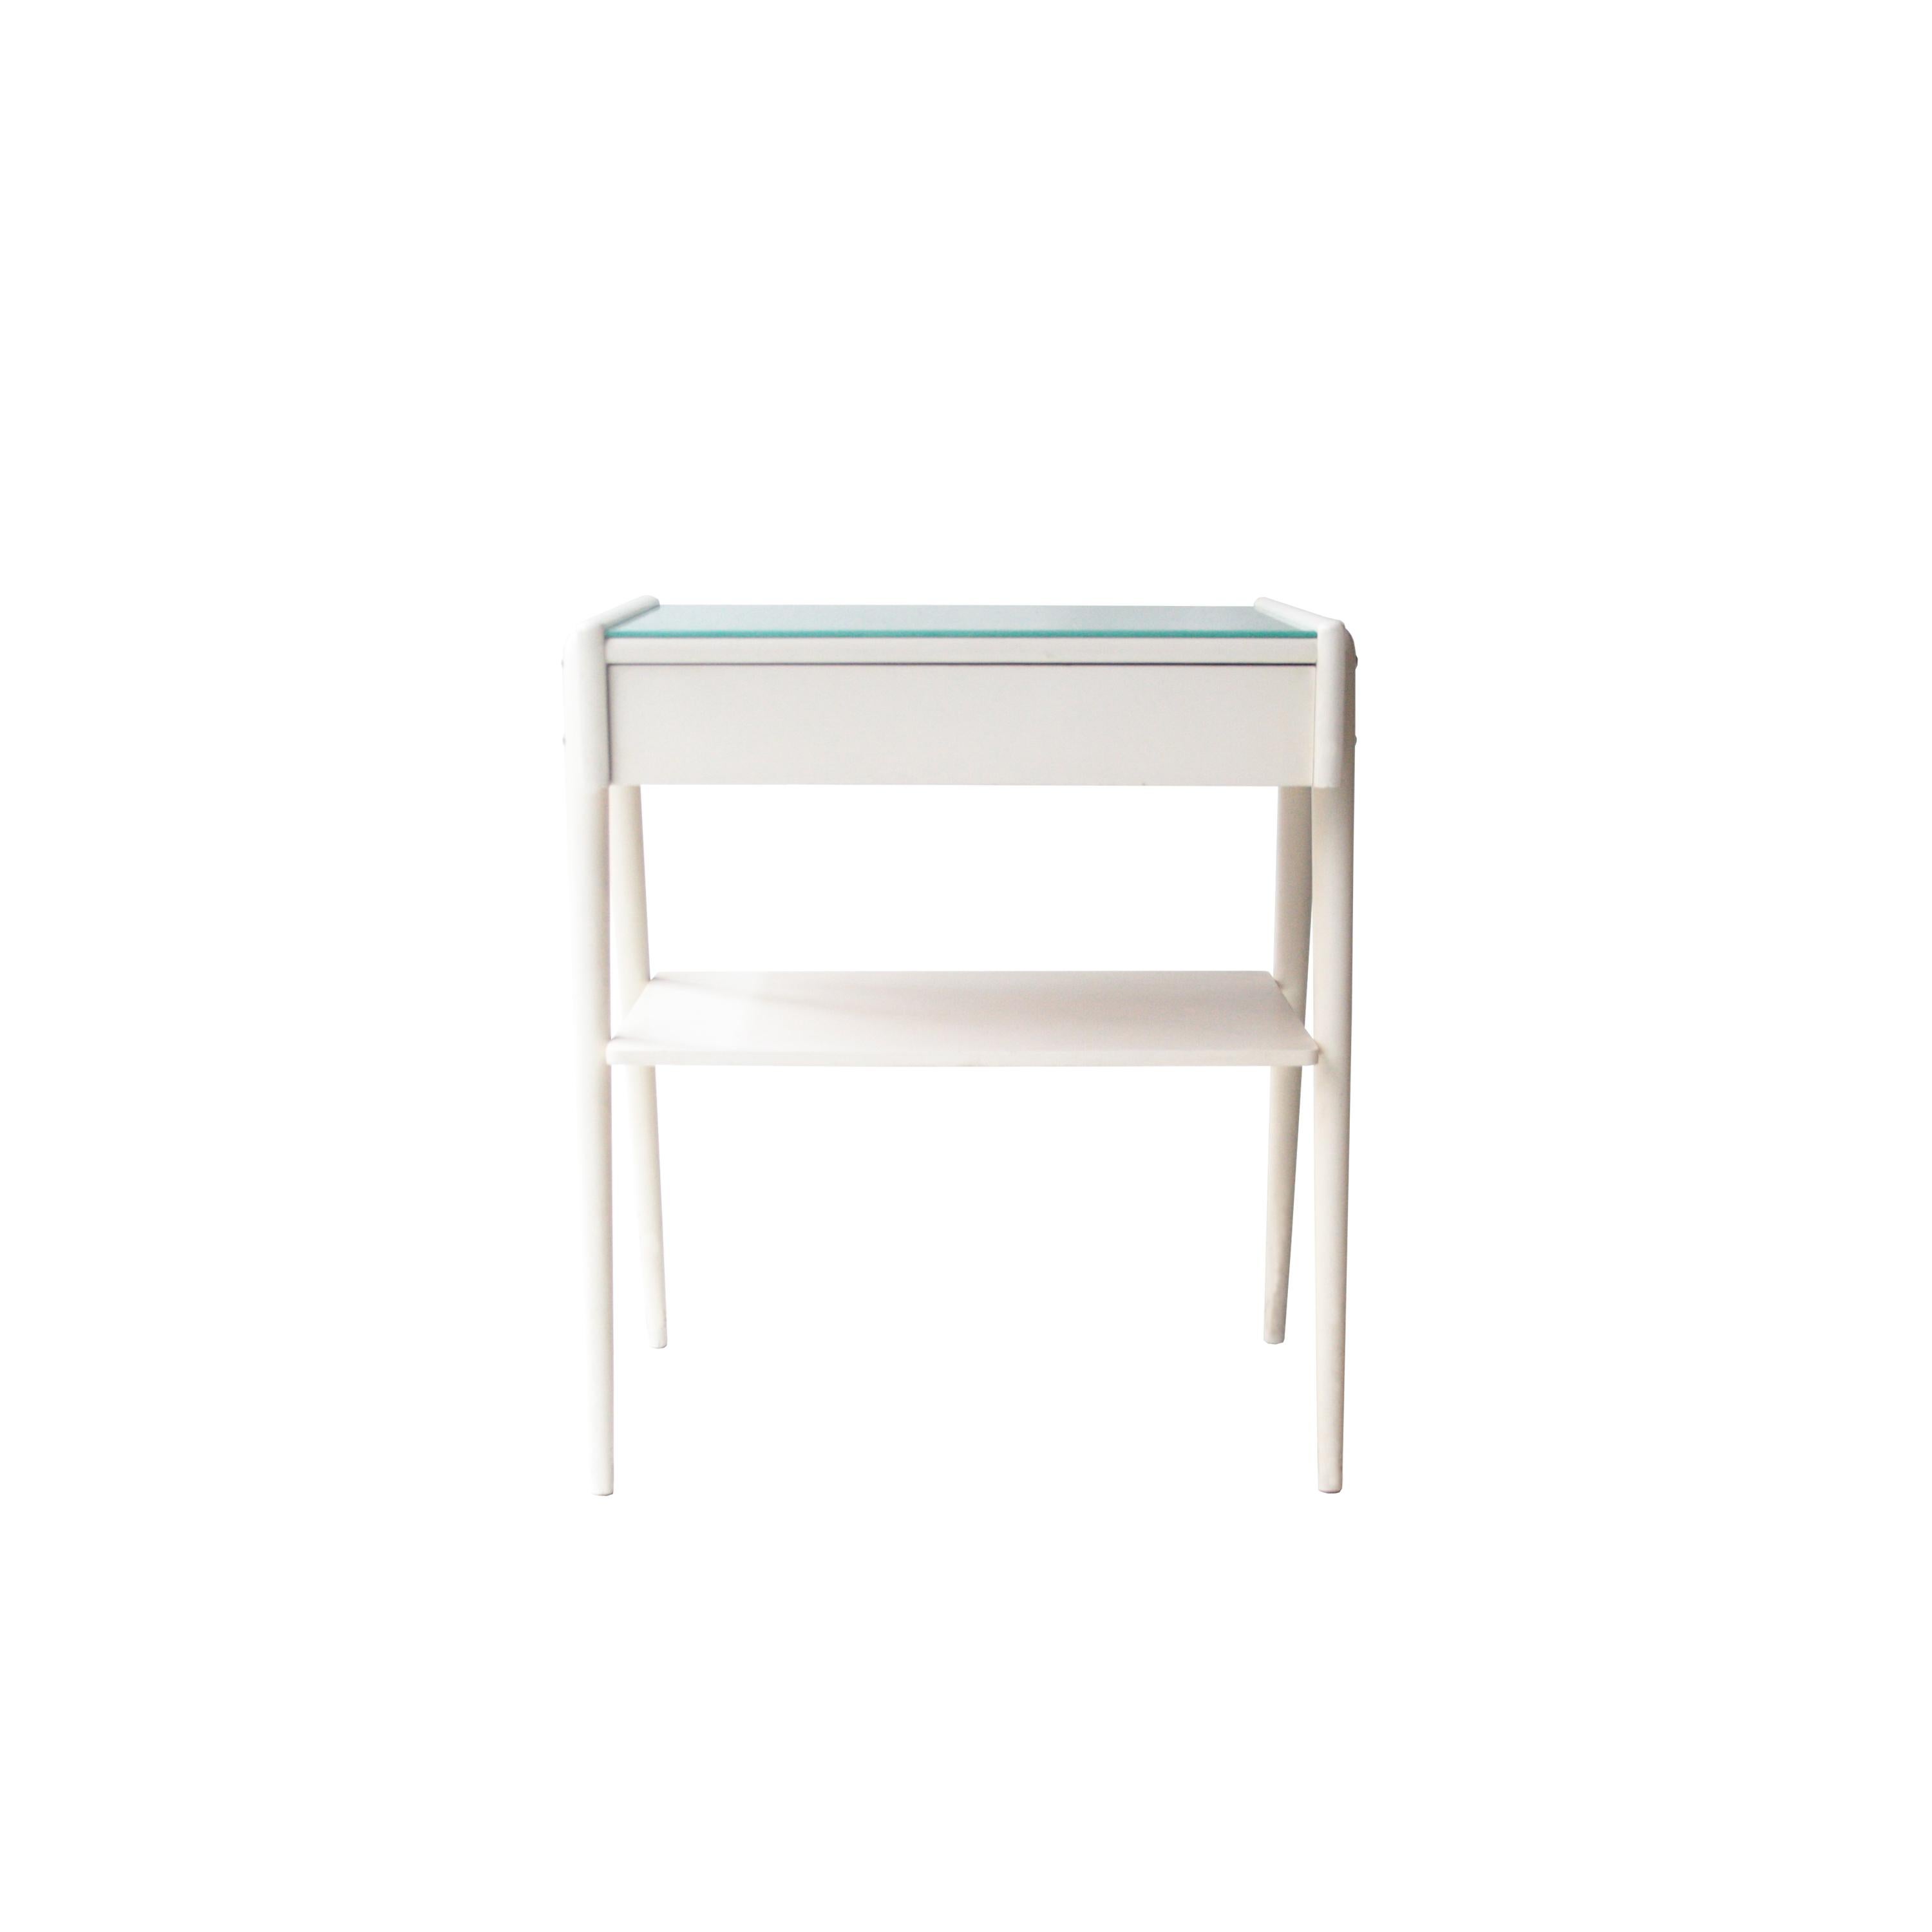 Pair of bedside tables in white lacquered wood with glass top in lacobel in water green color.